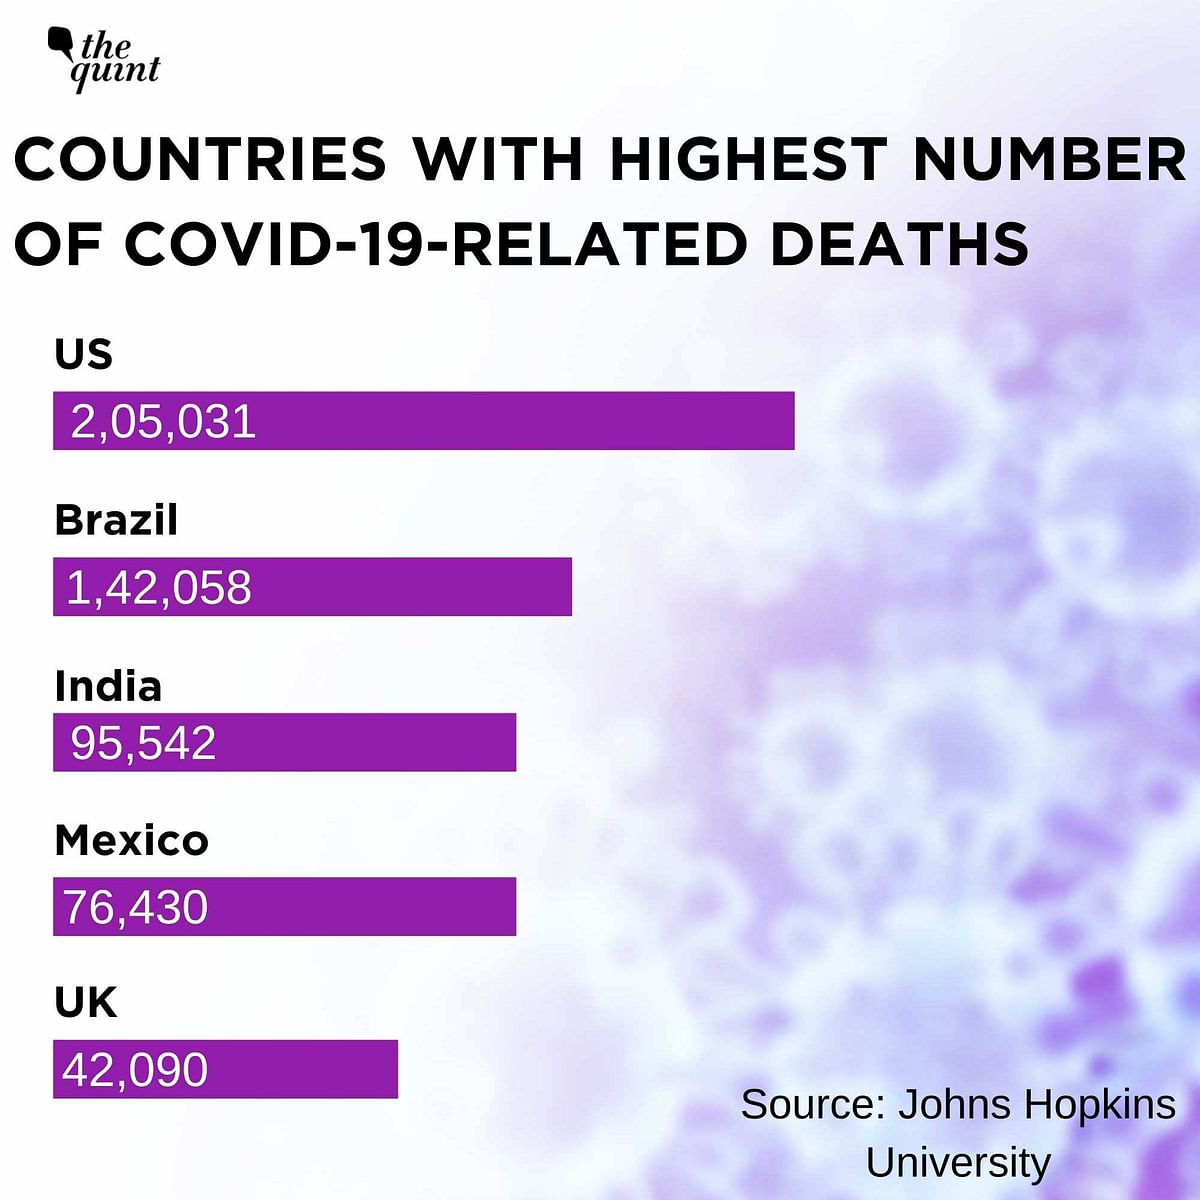 The highest number of deaths have taken place in the US (2,05,031), followed by Brazil (1,42,058) & India (95,542).